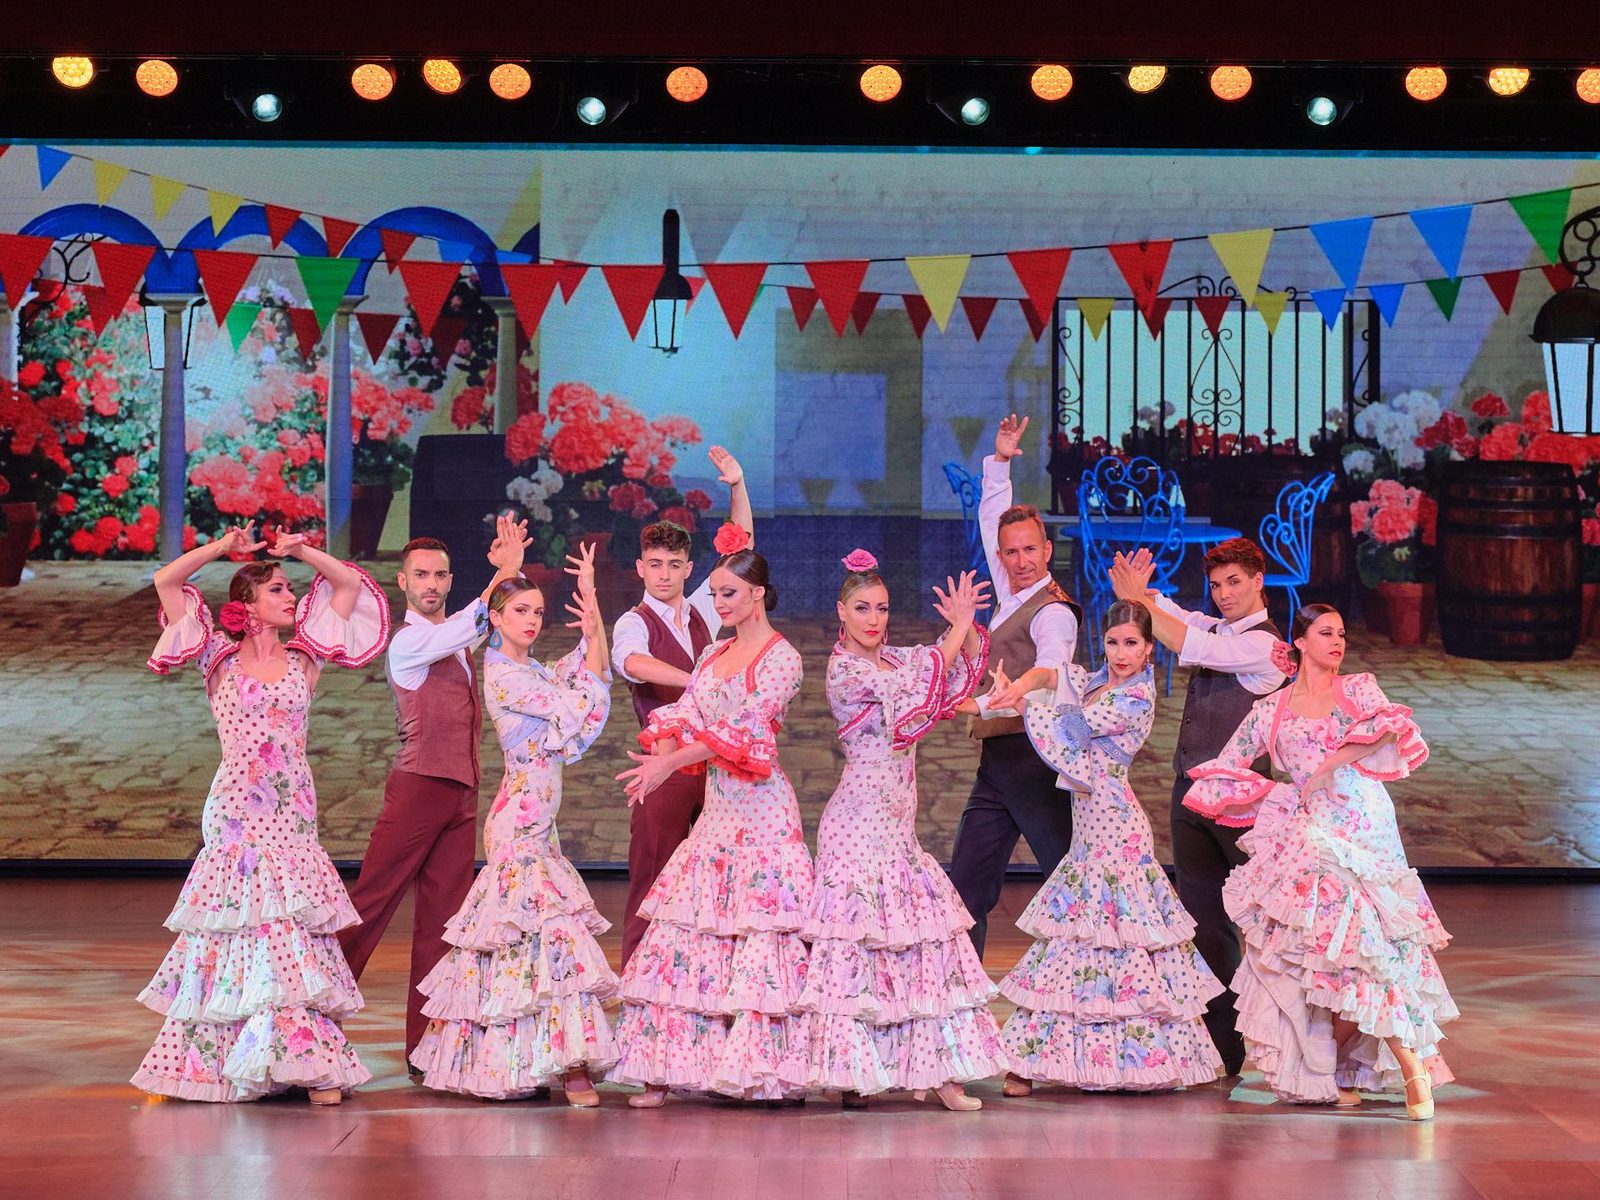 Group of Flamenco dancers in traditional flamenco dresses during the AIRE show at Benidorm Palace